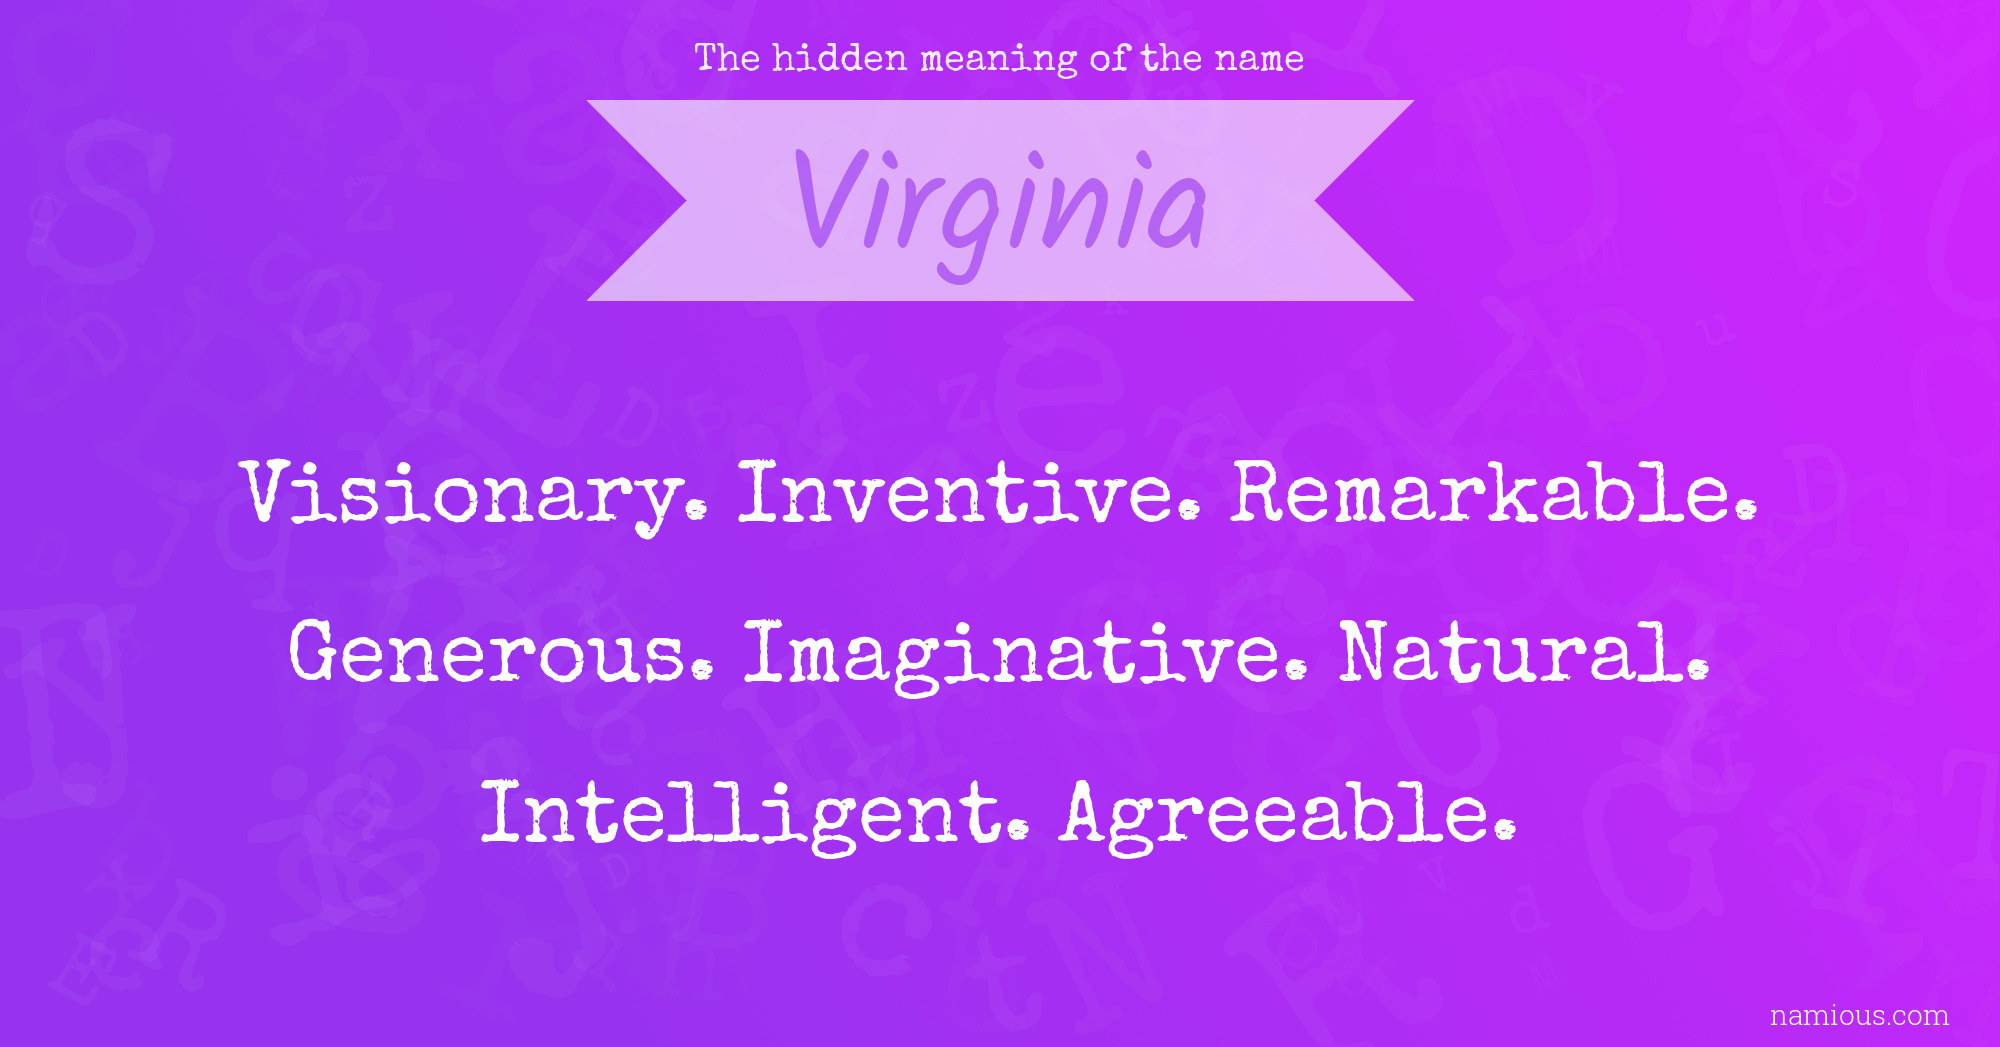 The hidden meaning of the name Virginia